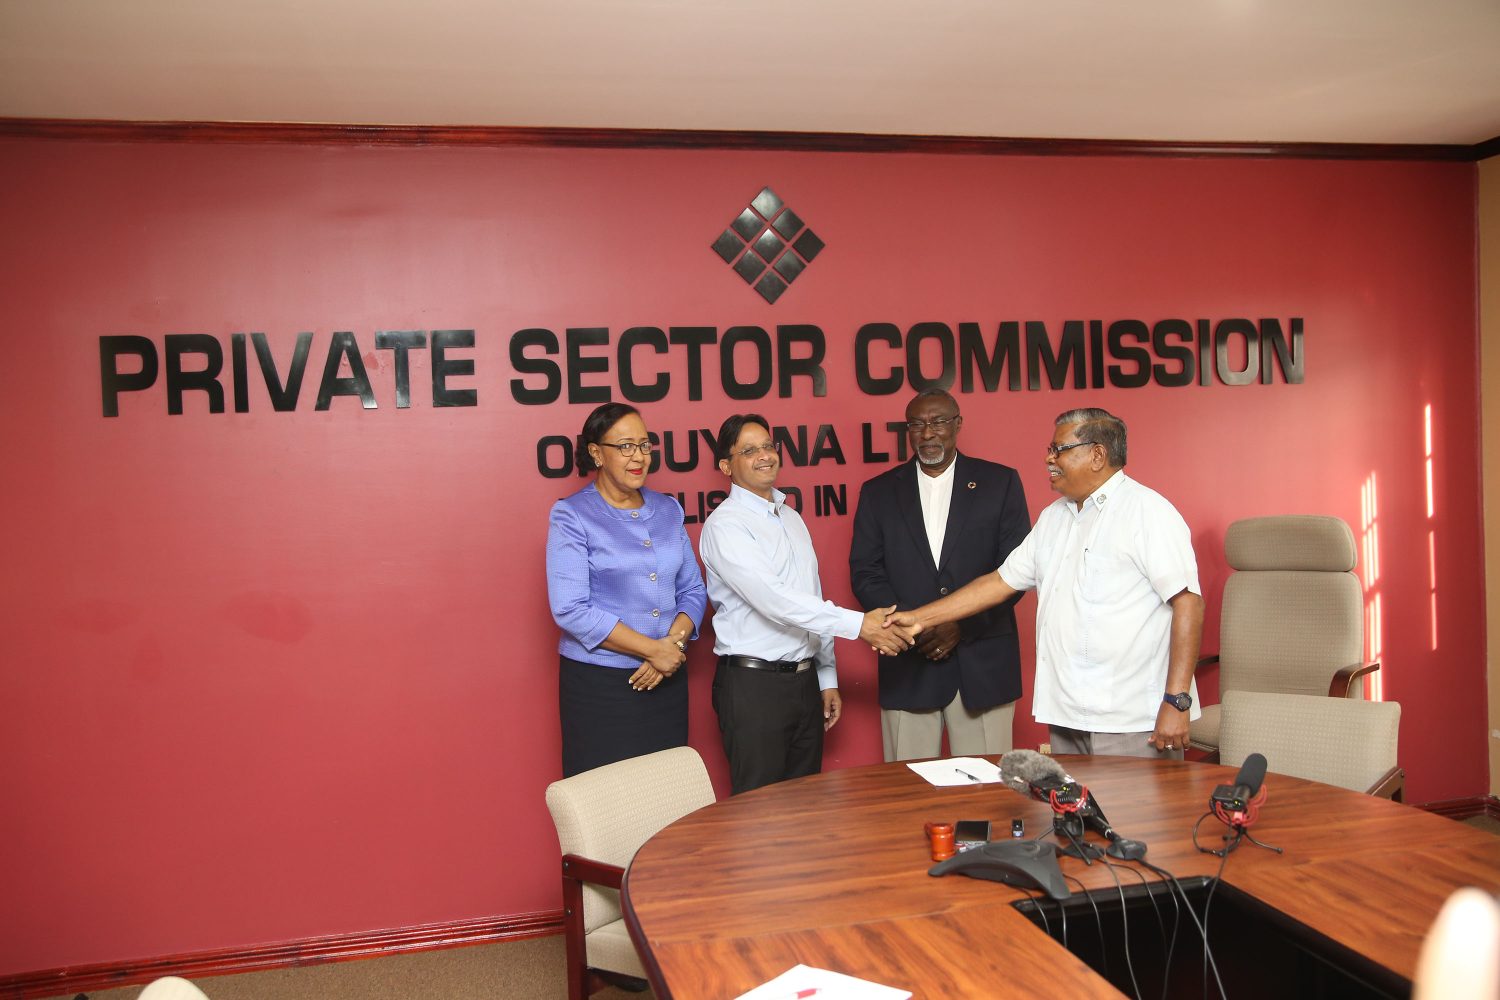 A ceremonial handshake between the Director General of the Civil Defence Commission Chabilall Ramsarup (far right) and the Chairman of the Beharry Group of Companies Edward Anand Beharry at the handing over of donations for the victims of Hurricanes Irma and Maria yesterday. Also photographed are Elizabeth Alleyne (far left), Executive Director of the Private Sector Commission (PSC), and Desmond Sears, Vice-Chairman of the PSC. (Photo by Keno George)
